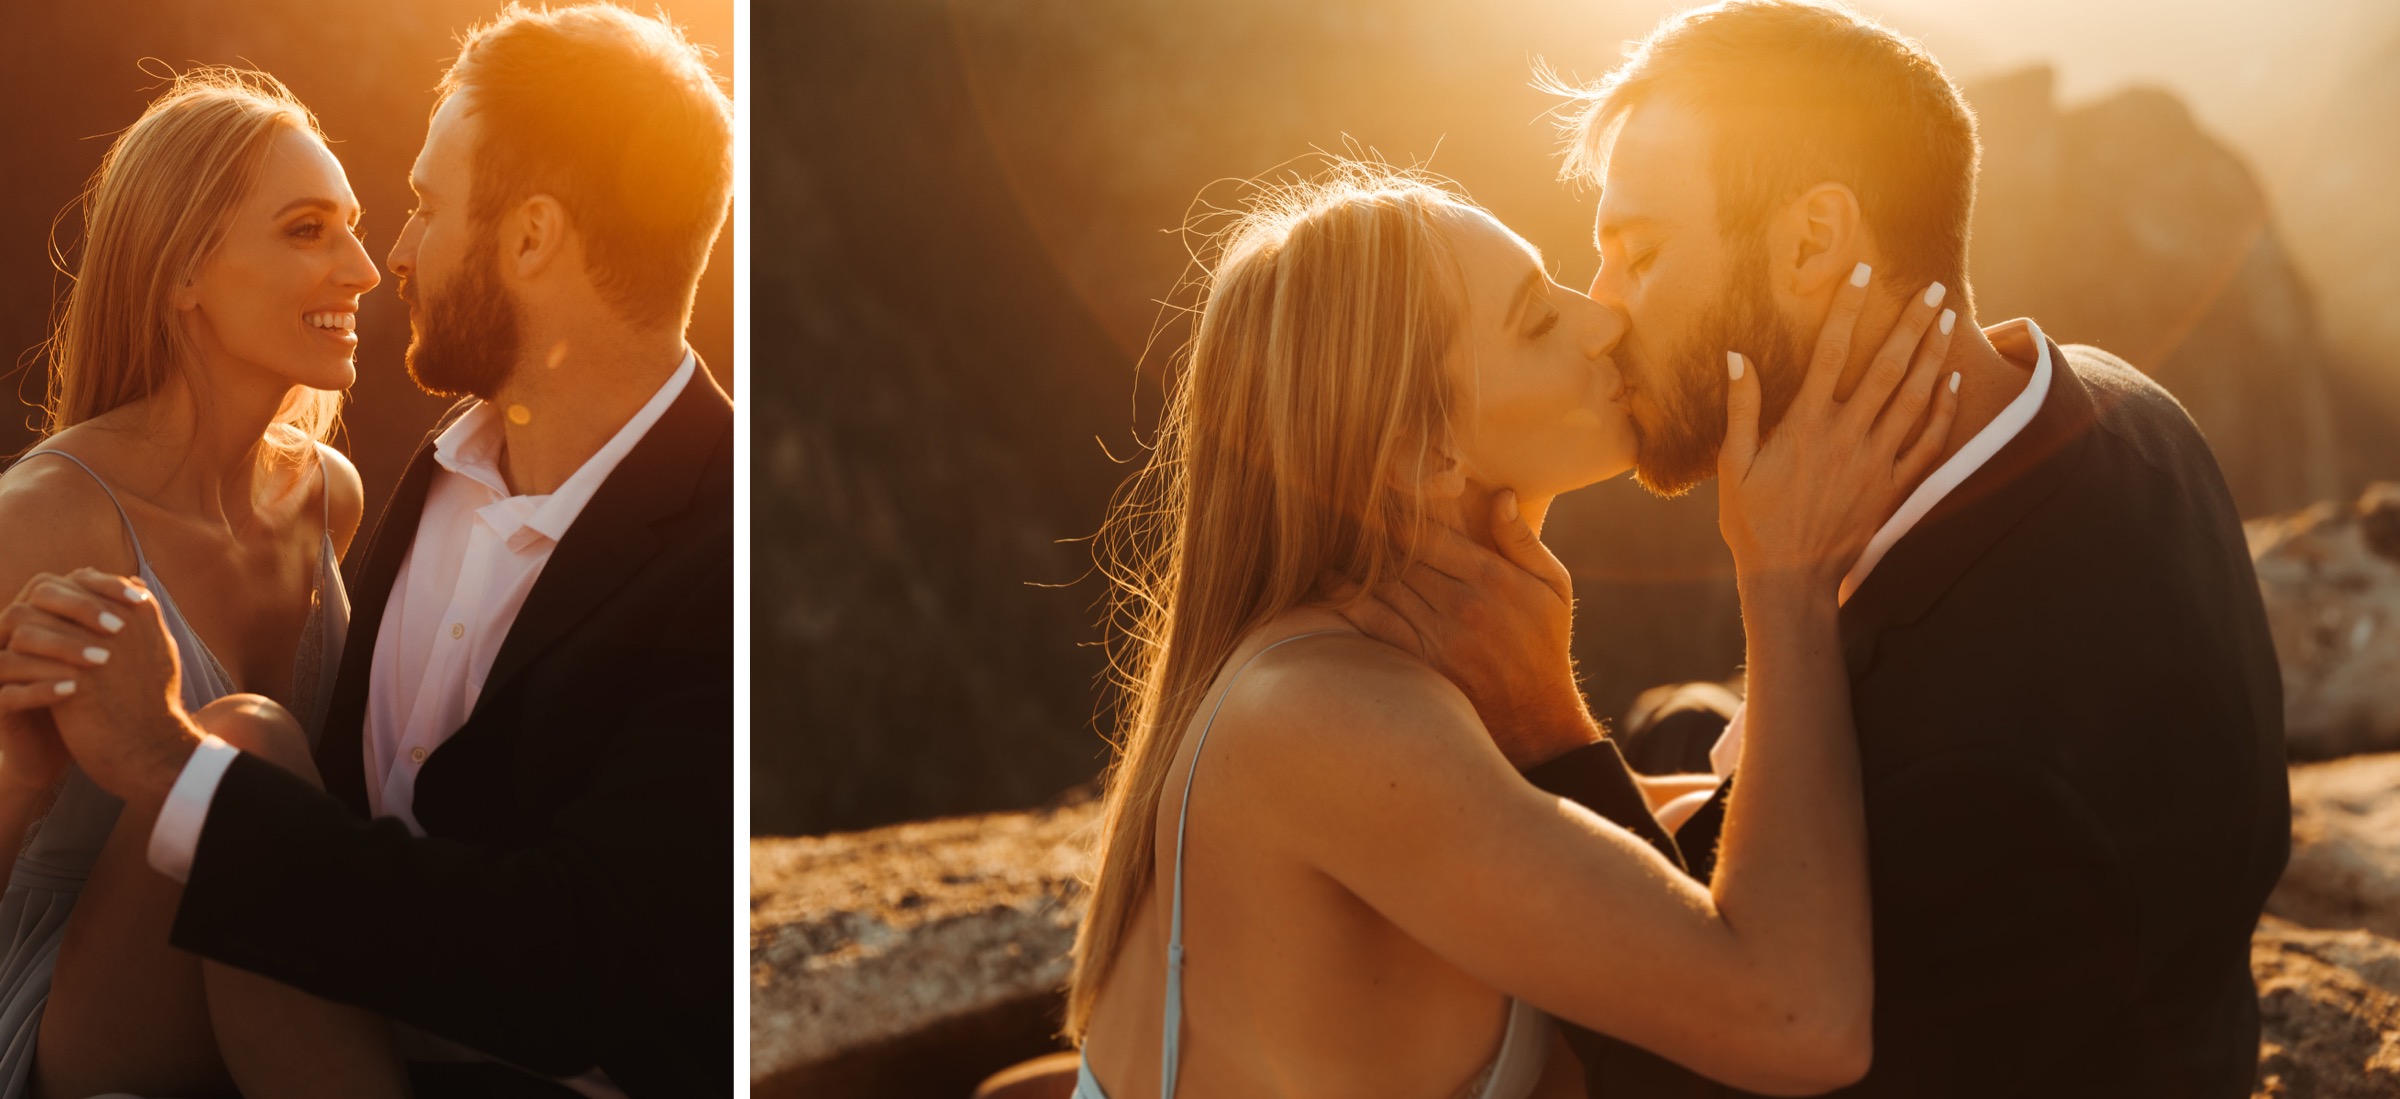 golden hour engagement session at yosemite